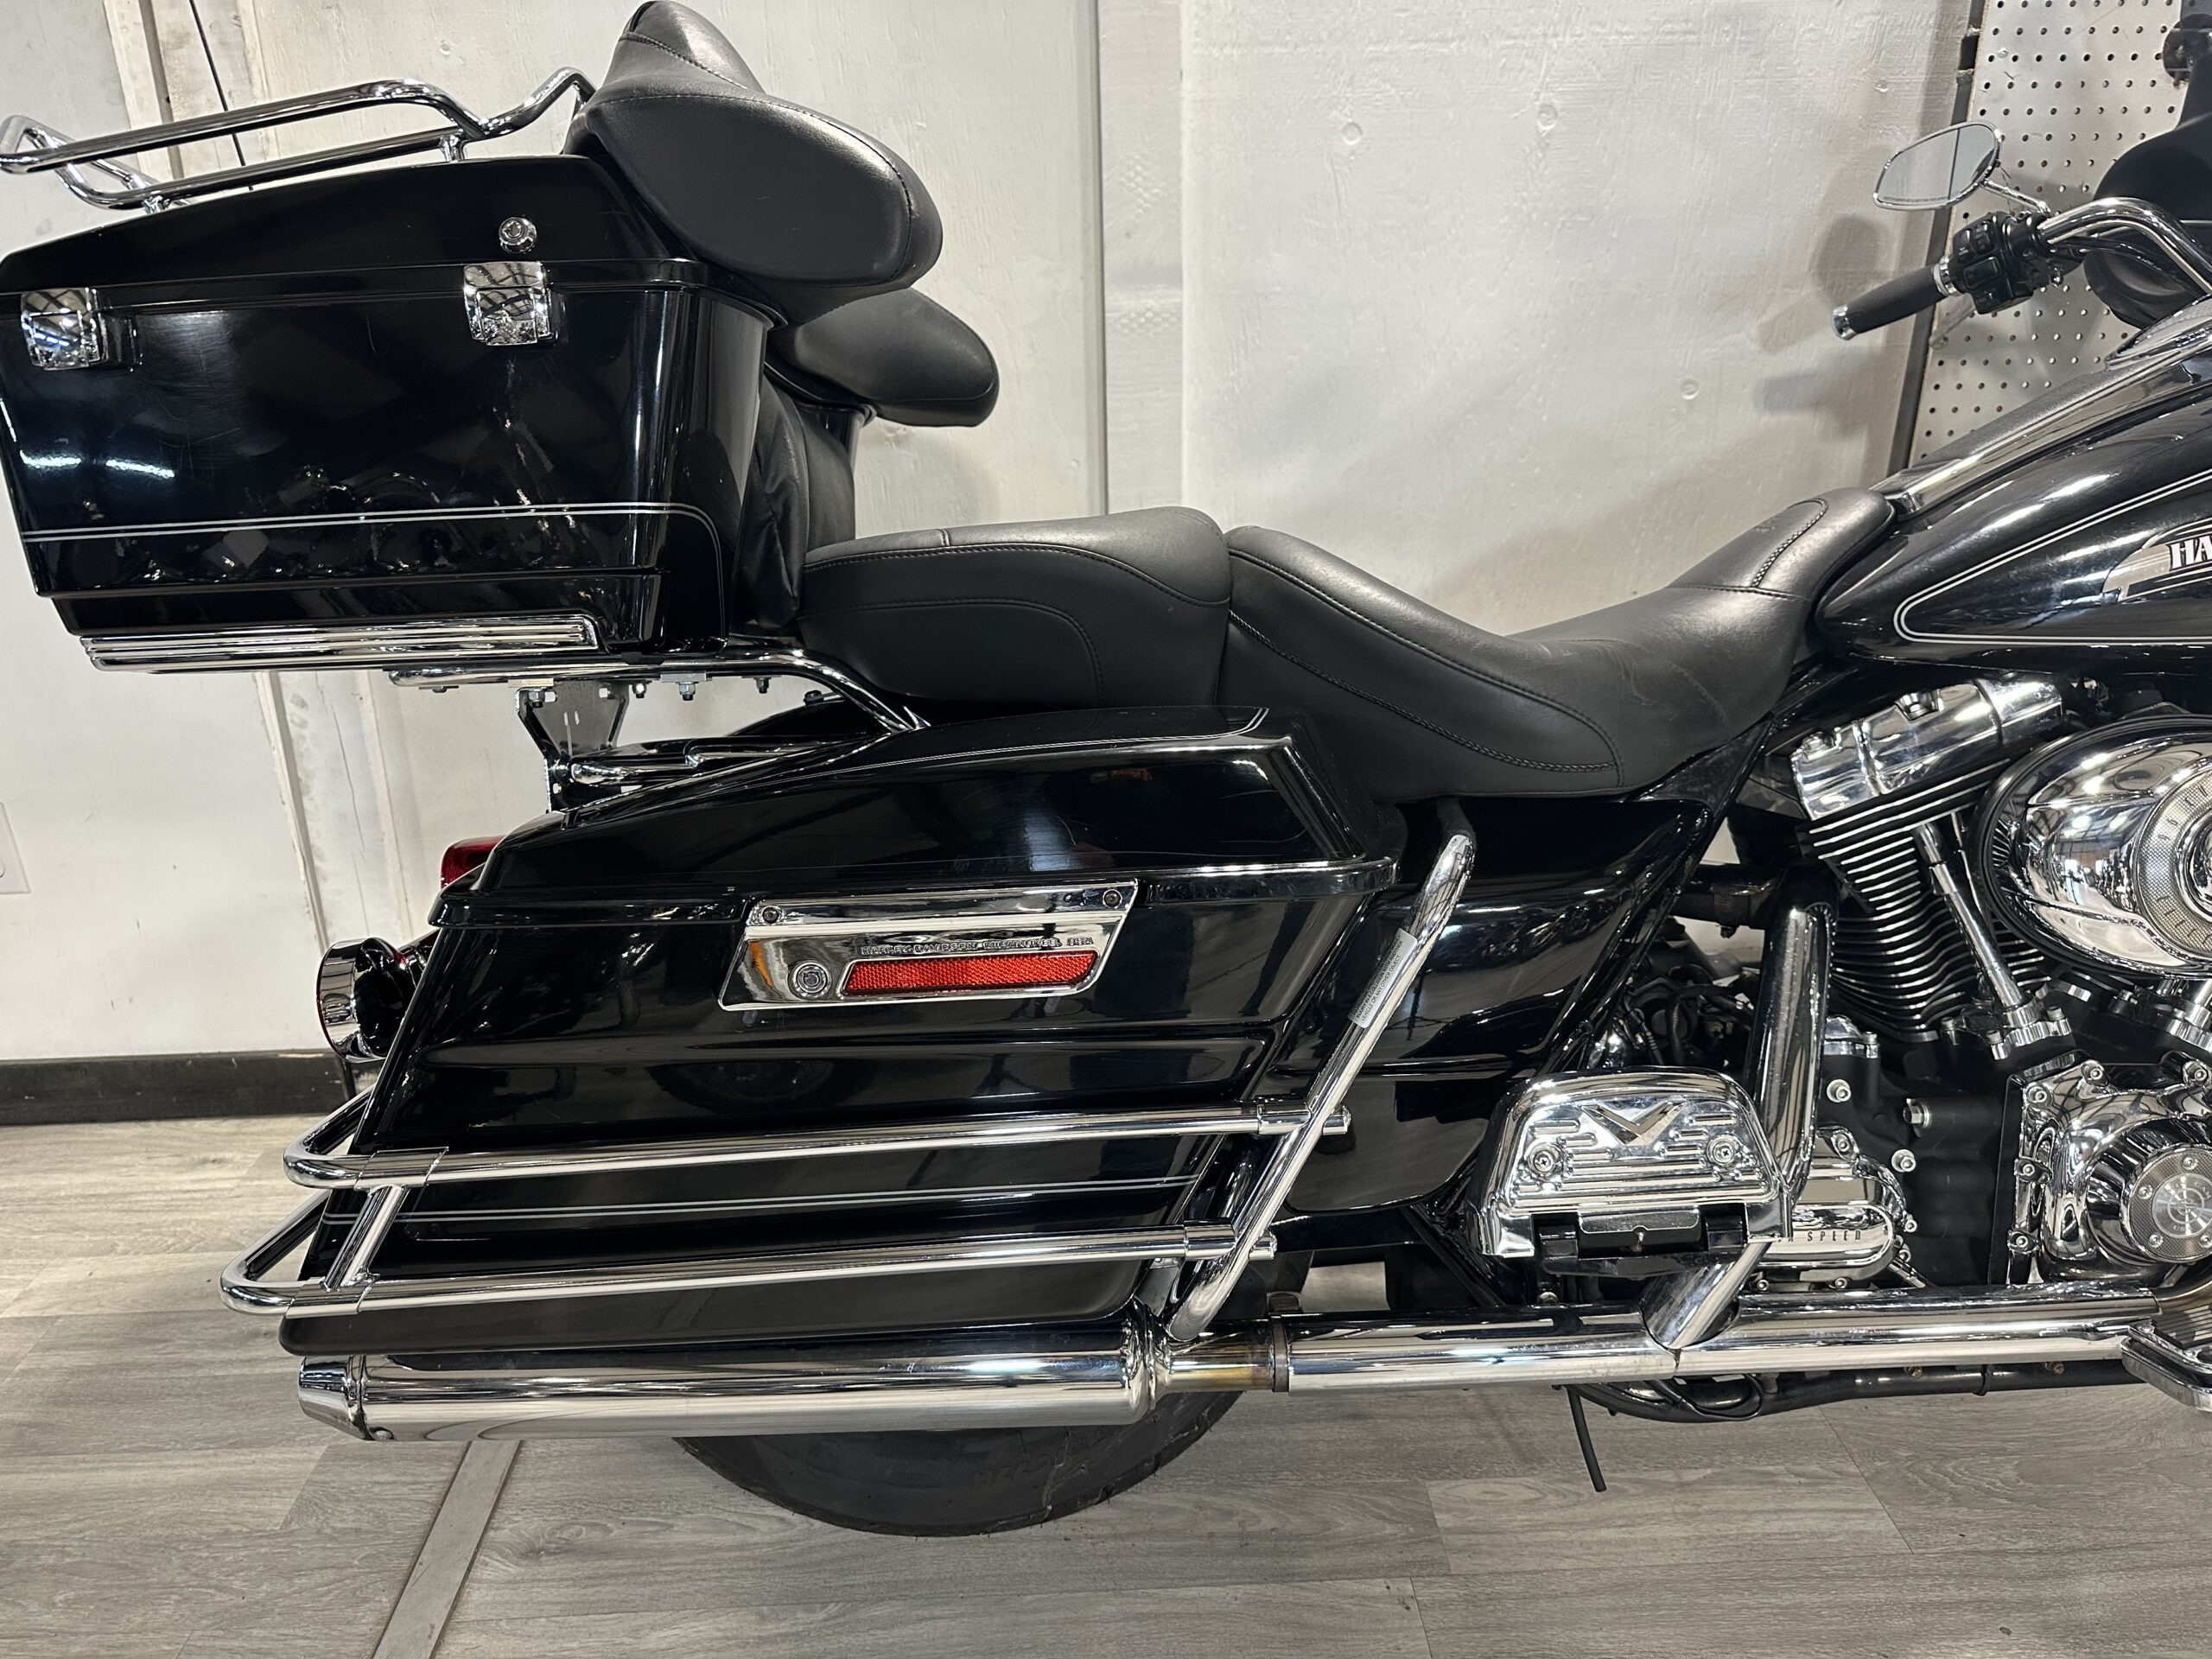 HARLEY DAVIDSON ELECTRA GLIDE CLASSIC FOR SALE